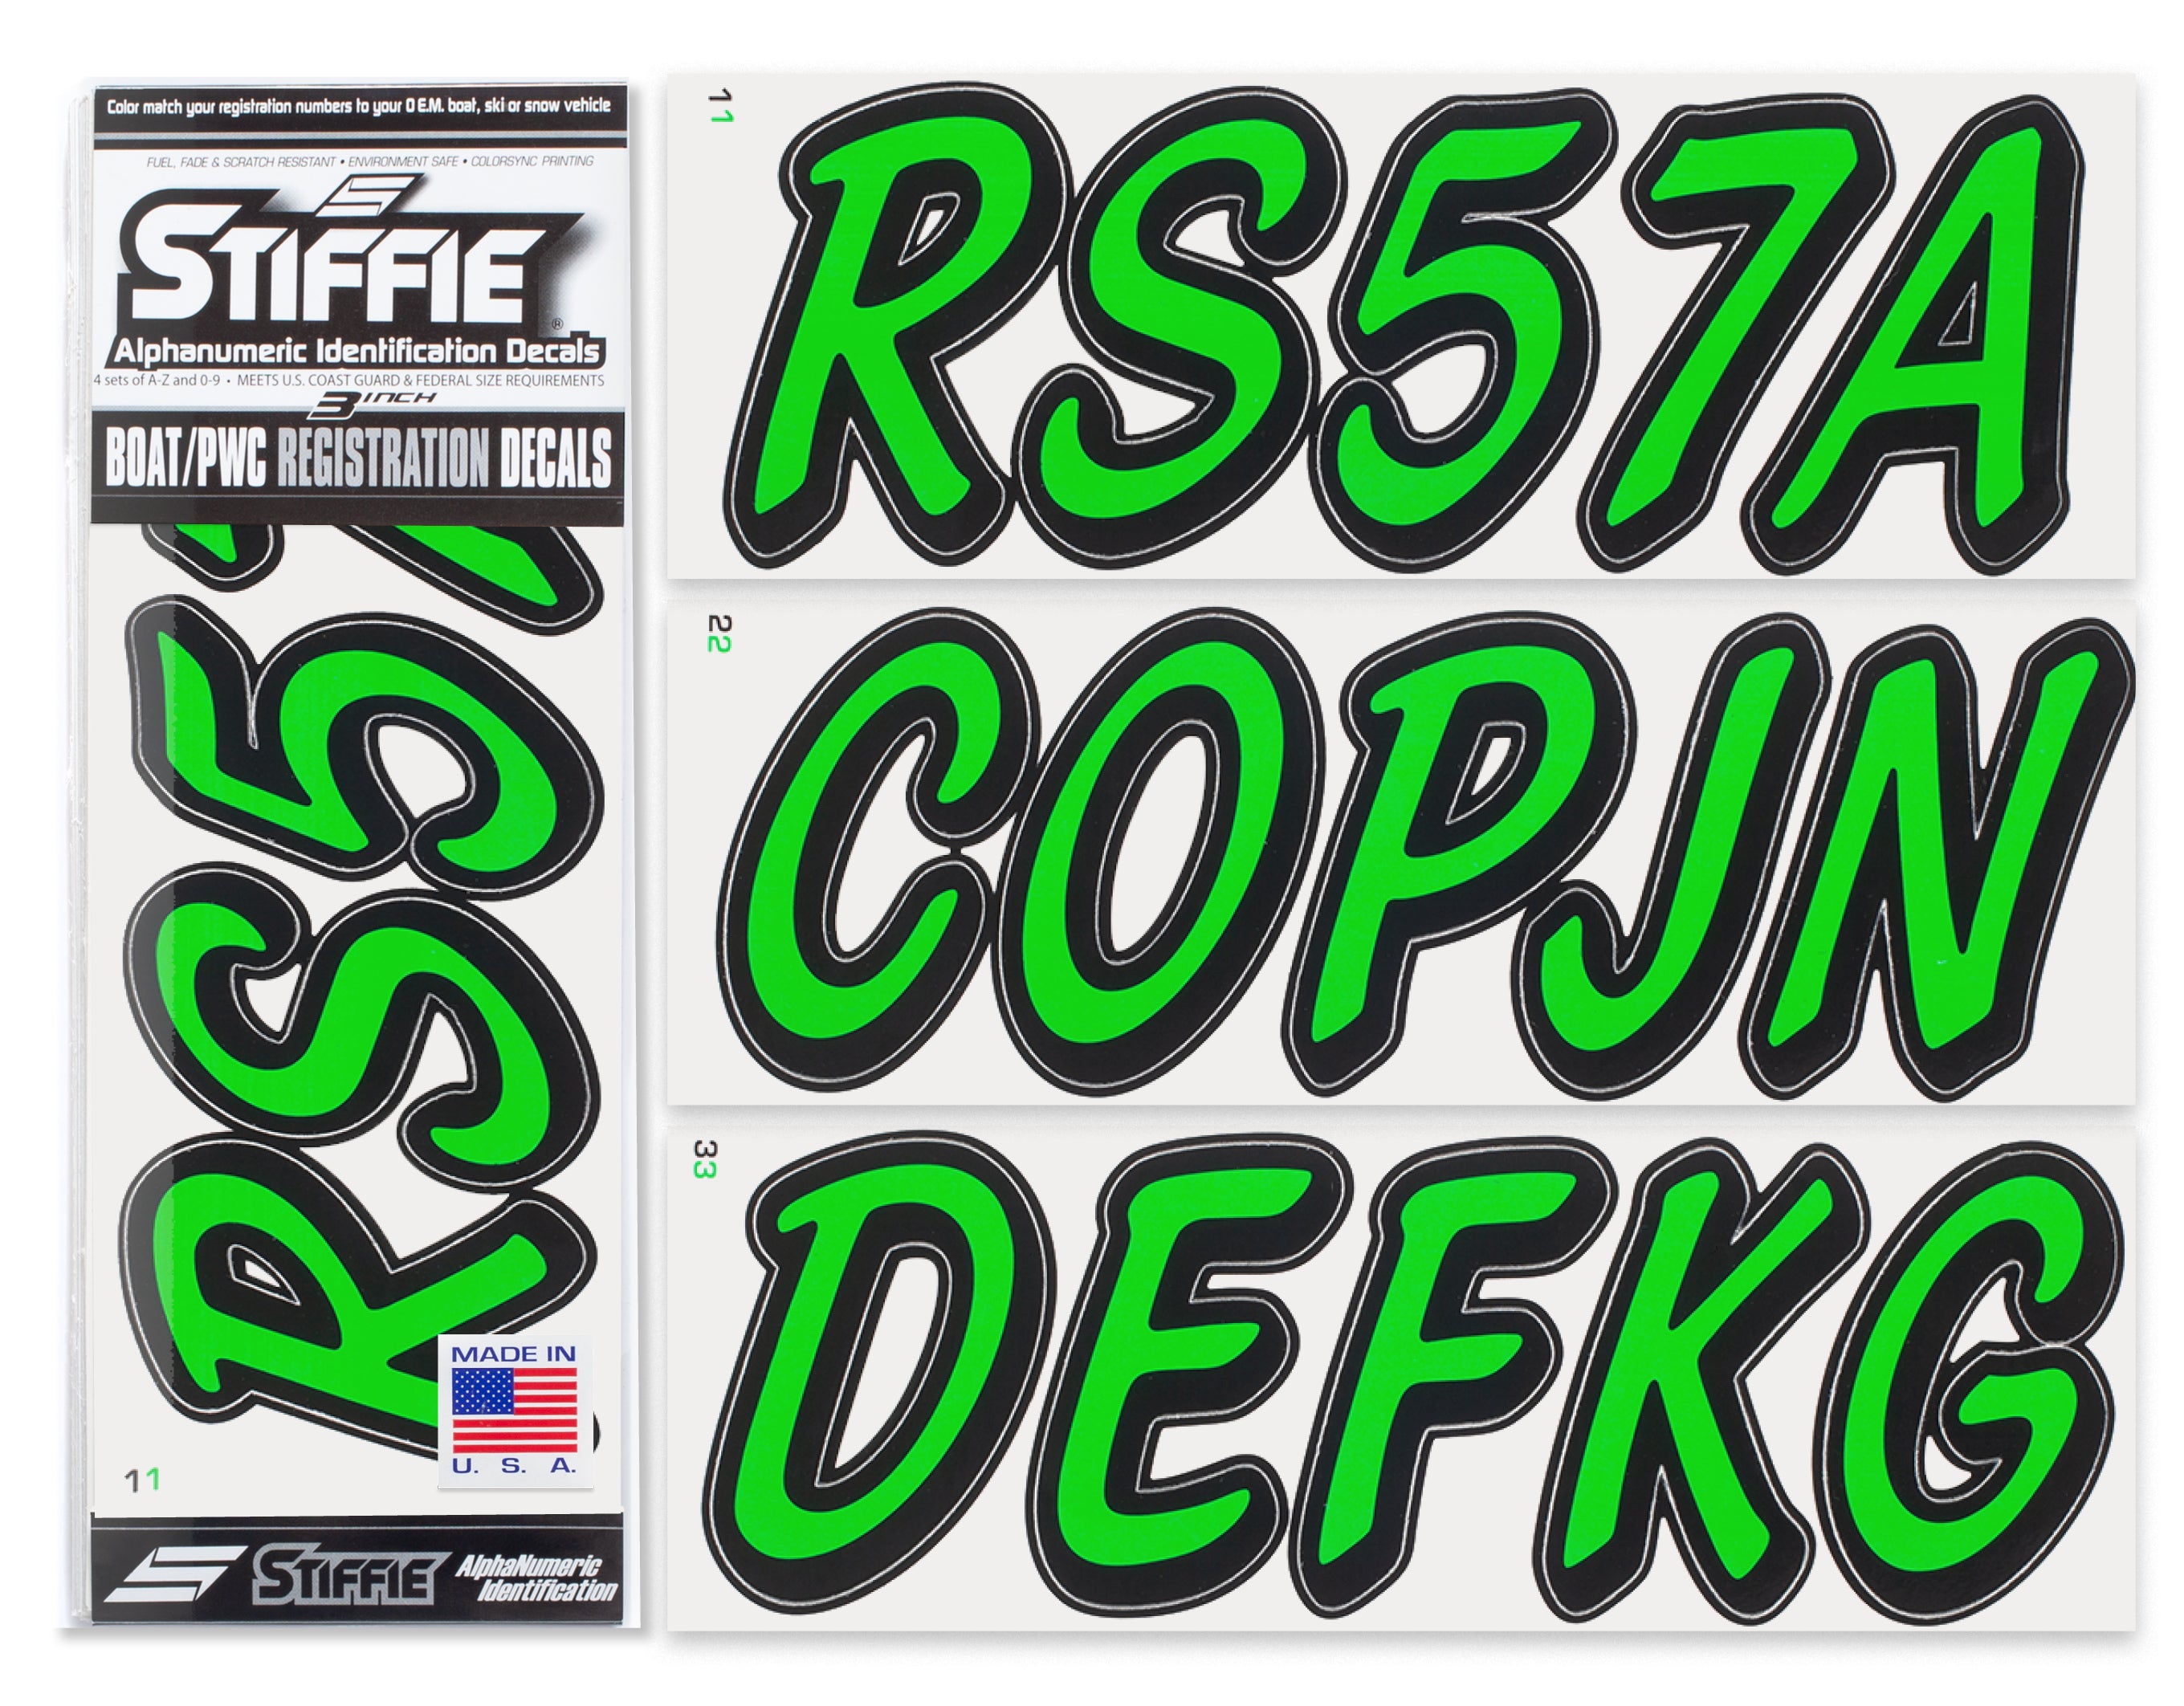 STIFFIE Whipline Solid Electric Green/Black 3" Alpha-Numeric Registration Identification Numbers Stickers Decals for Boats & Personal Watercraft